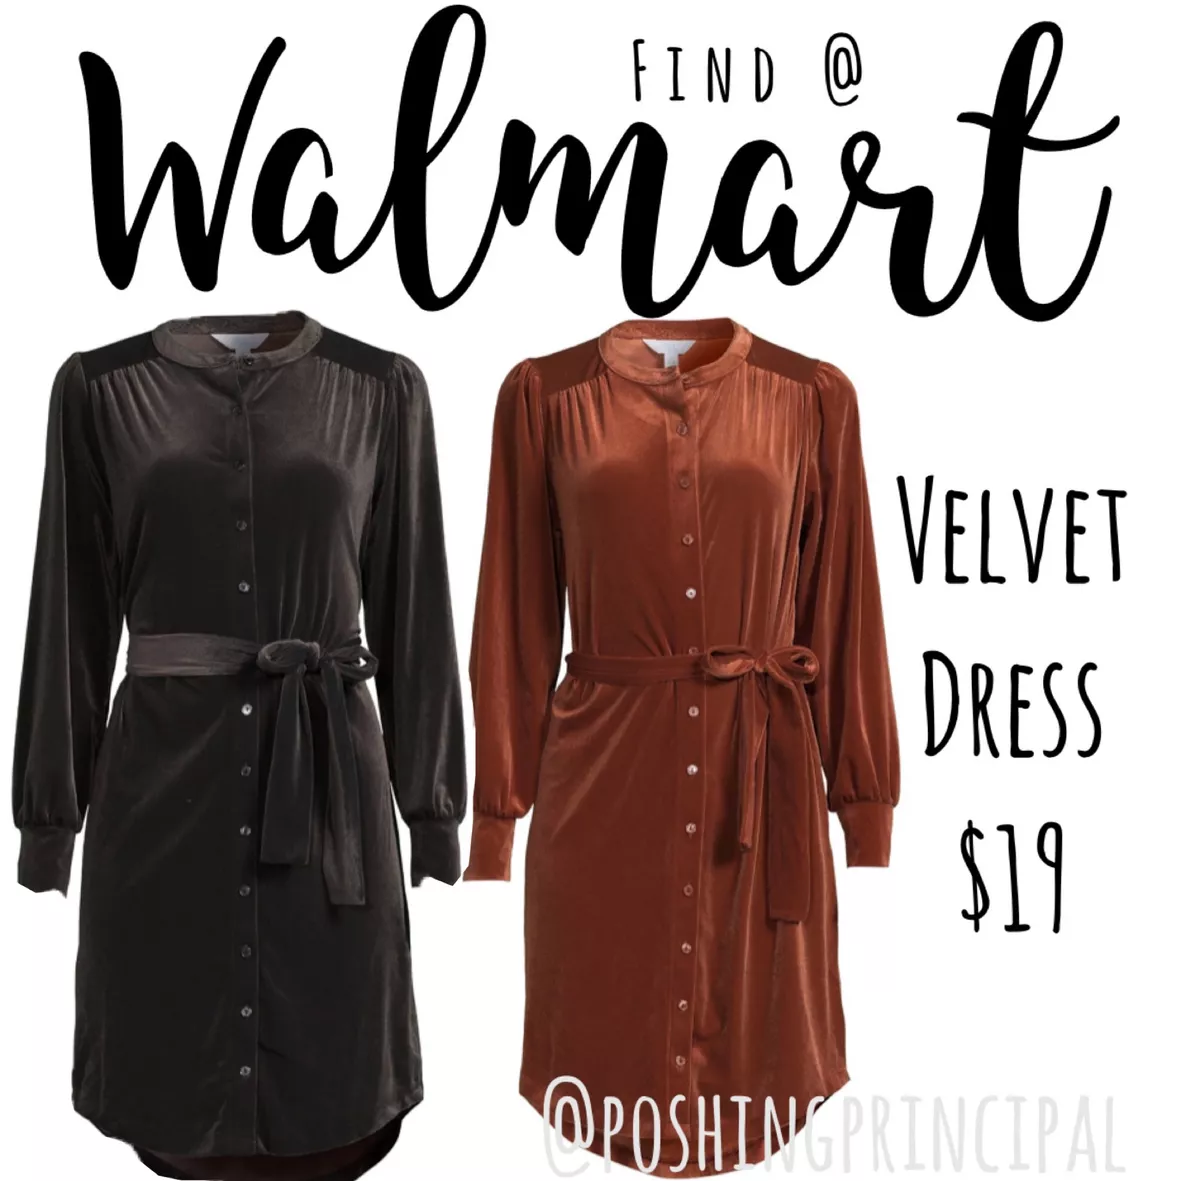 Time and Tru Women's Belted Velvet … curated on LTK